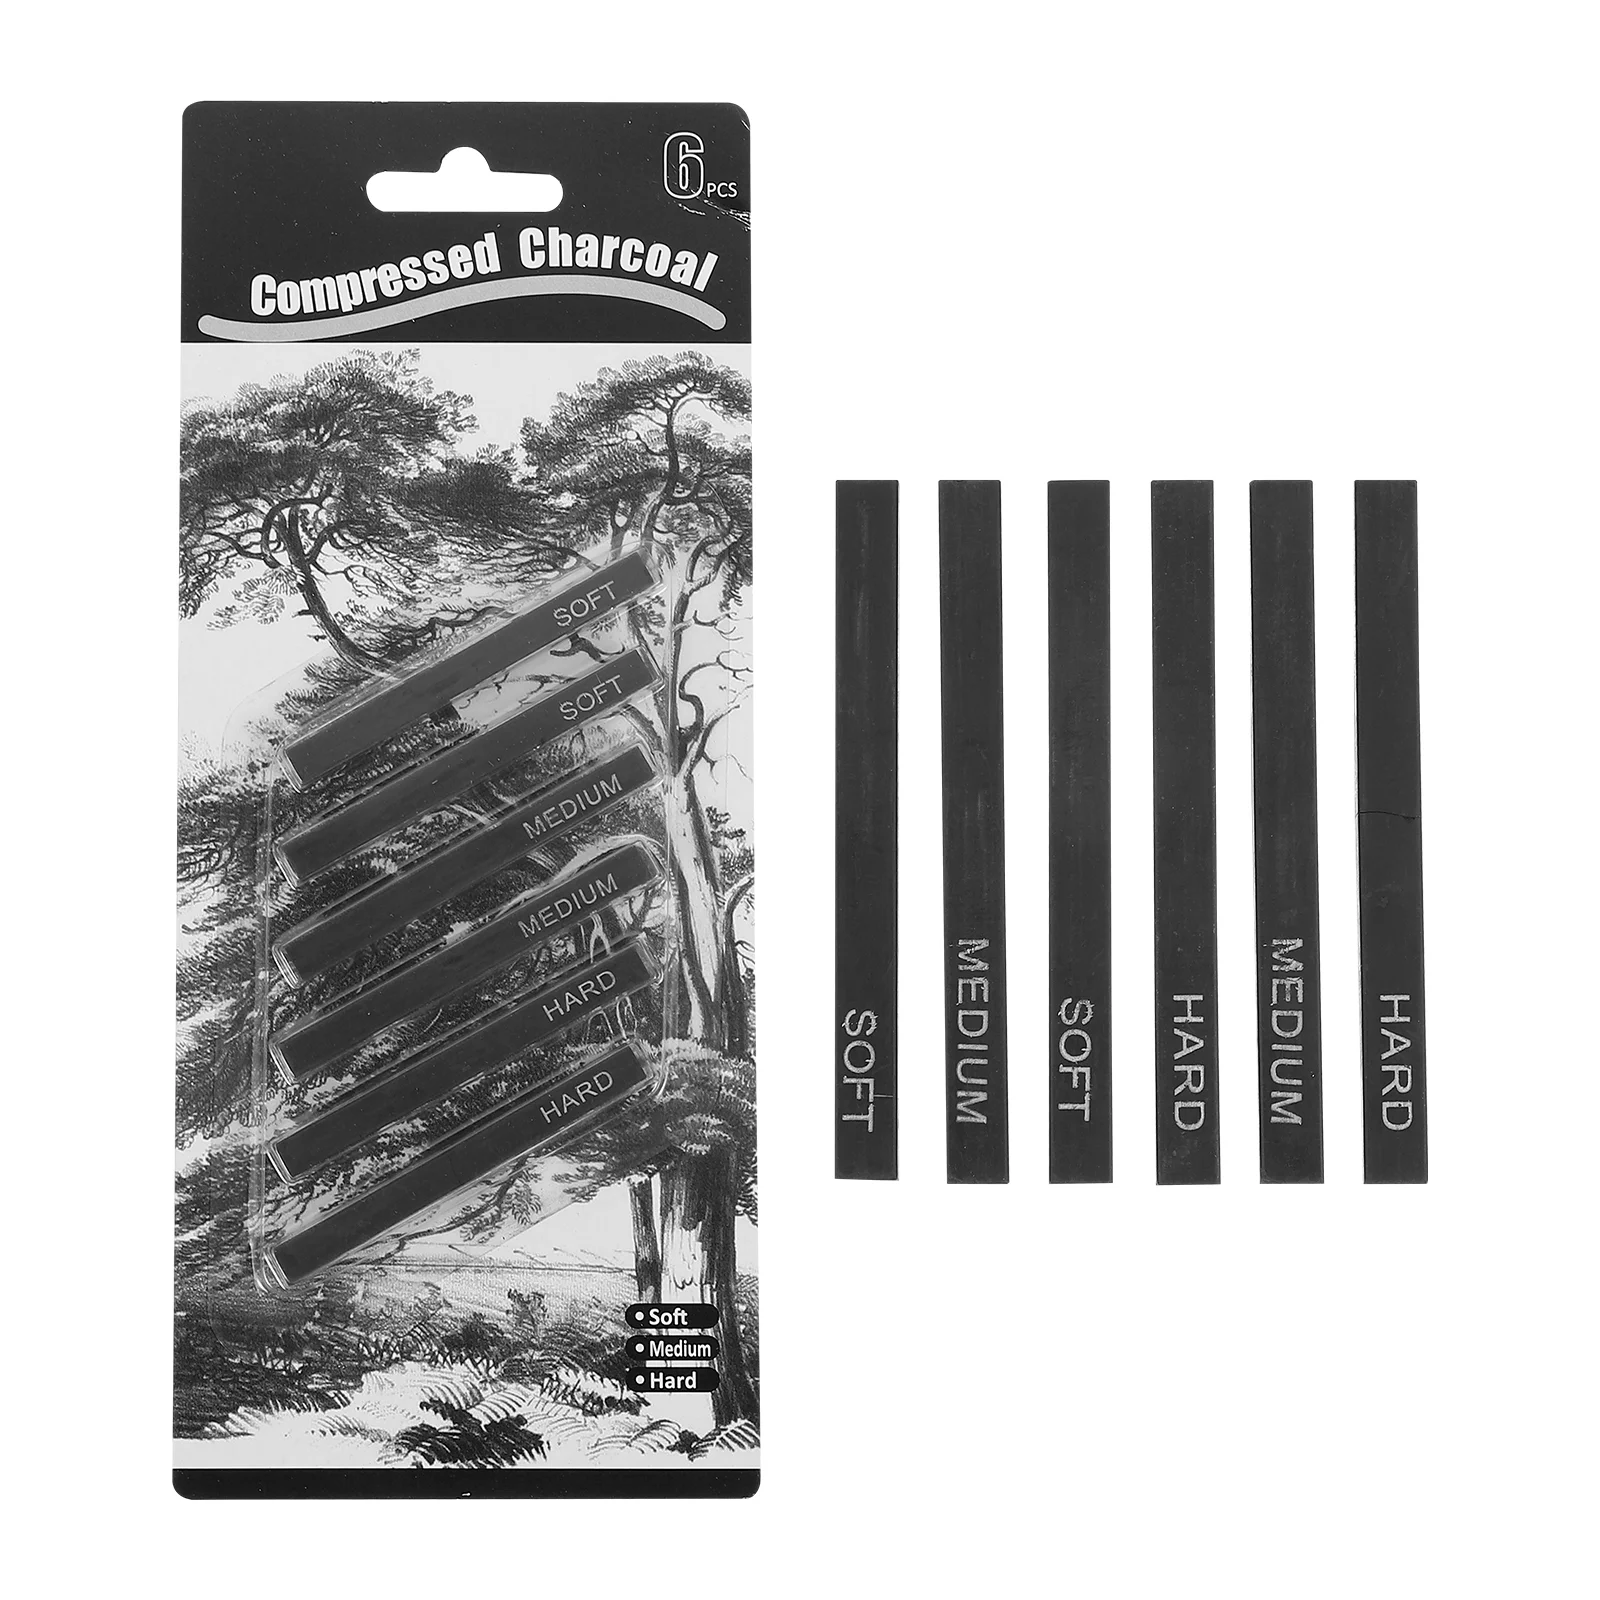 

Charcoal Sticks Compressed Sketch Drawing Vine Willow Charcoals Artist Shading Stick Painting Supplies Painter Sketching Student